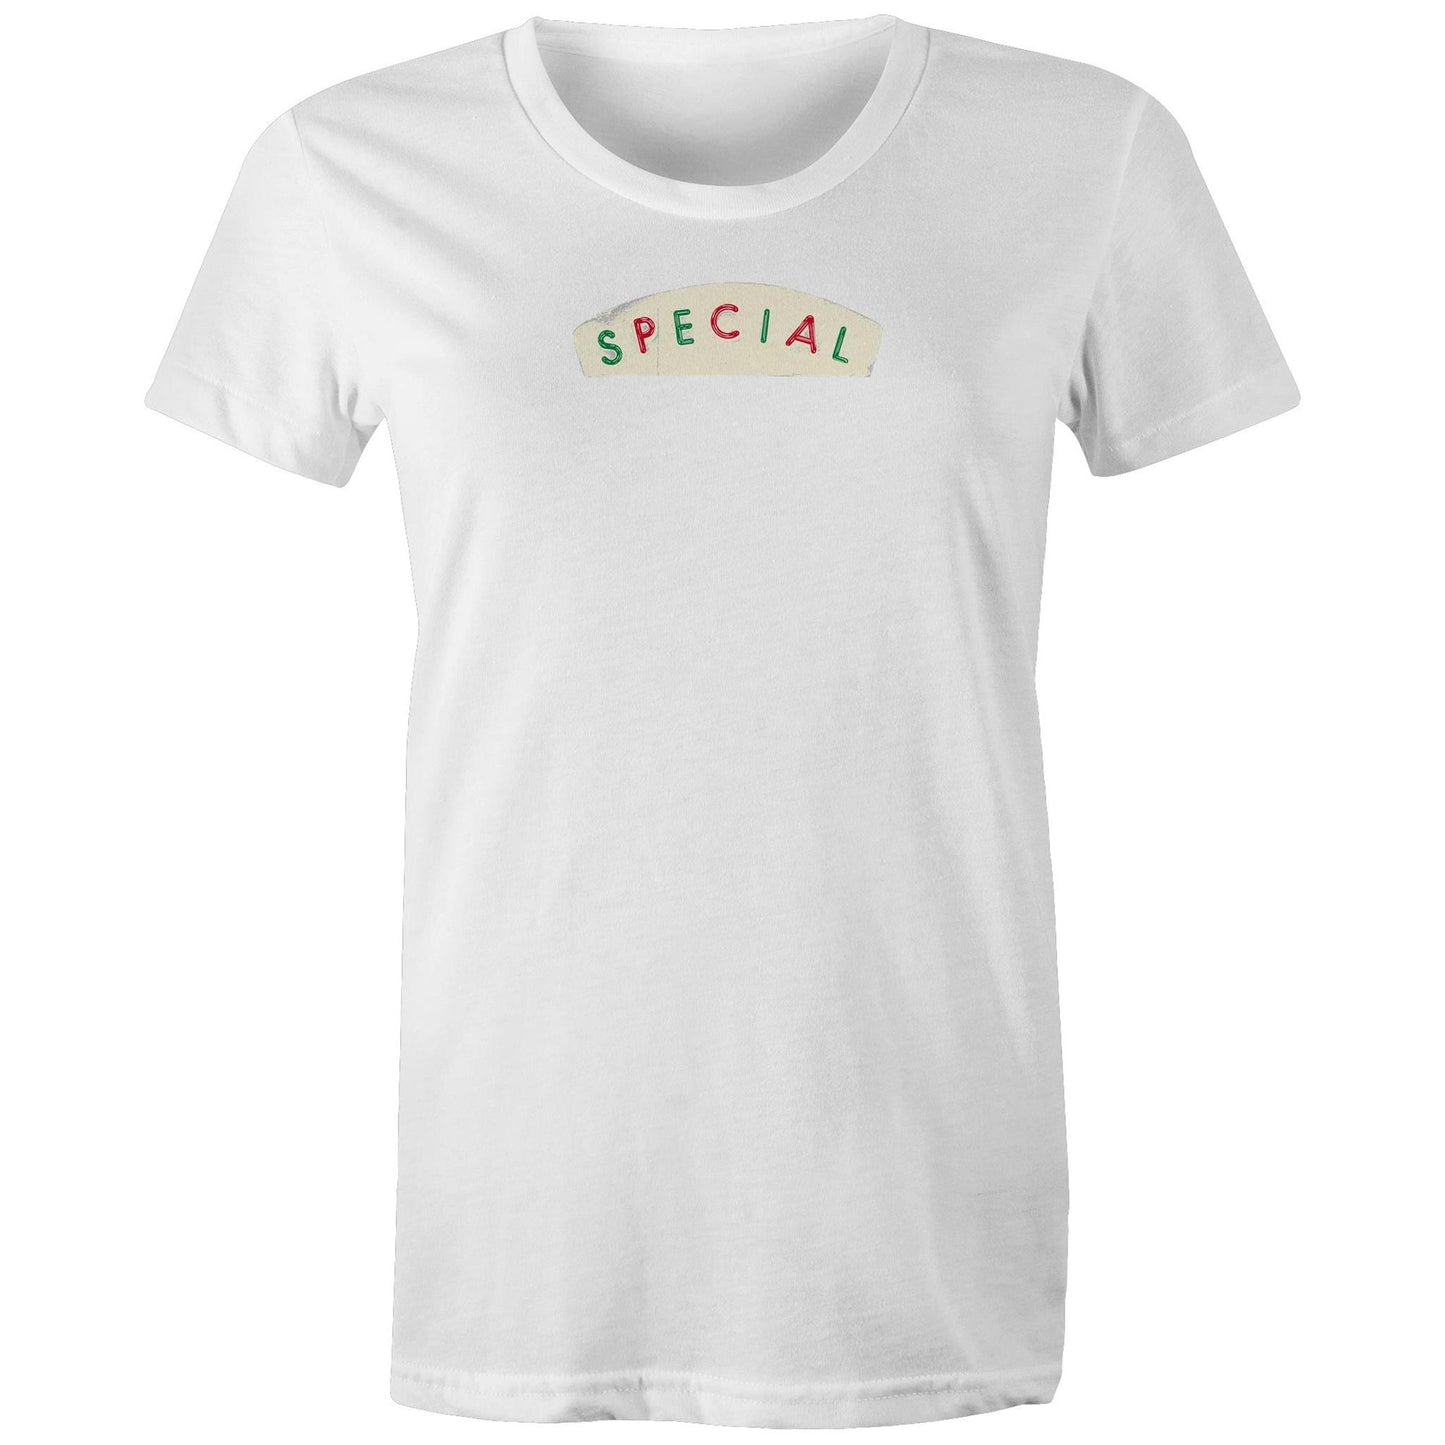 Special T Shirts for Women